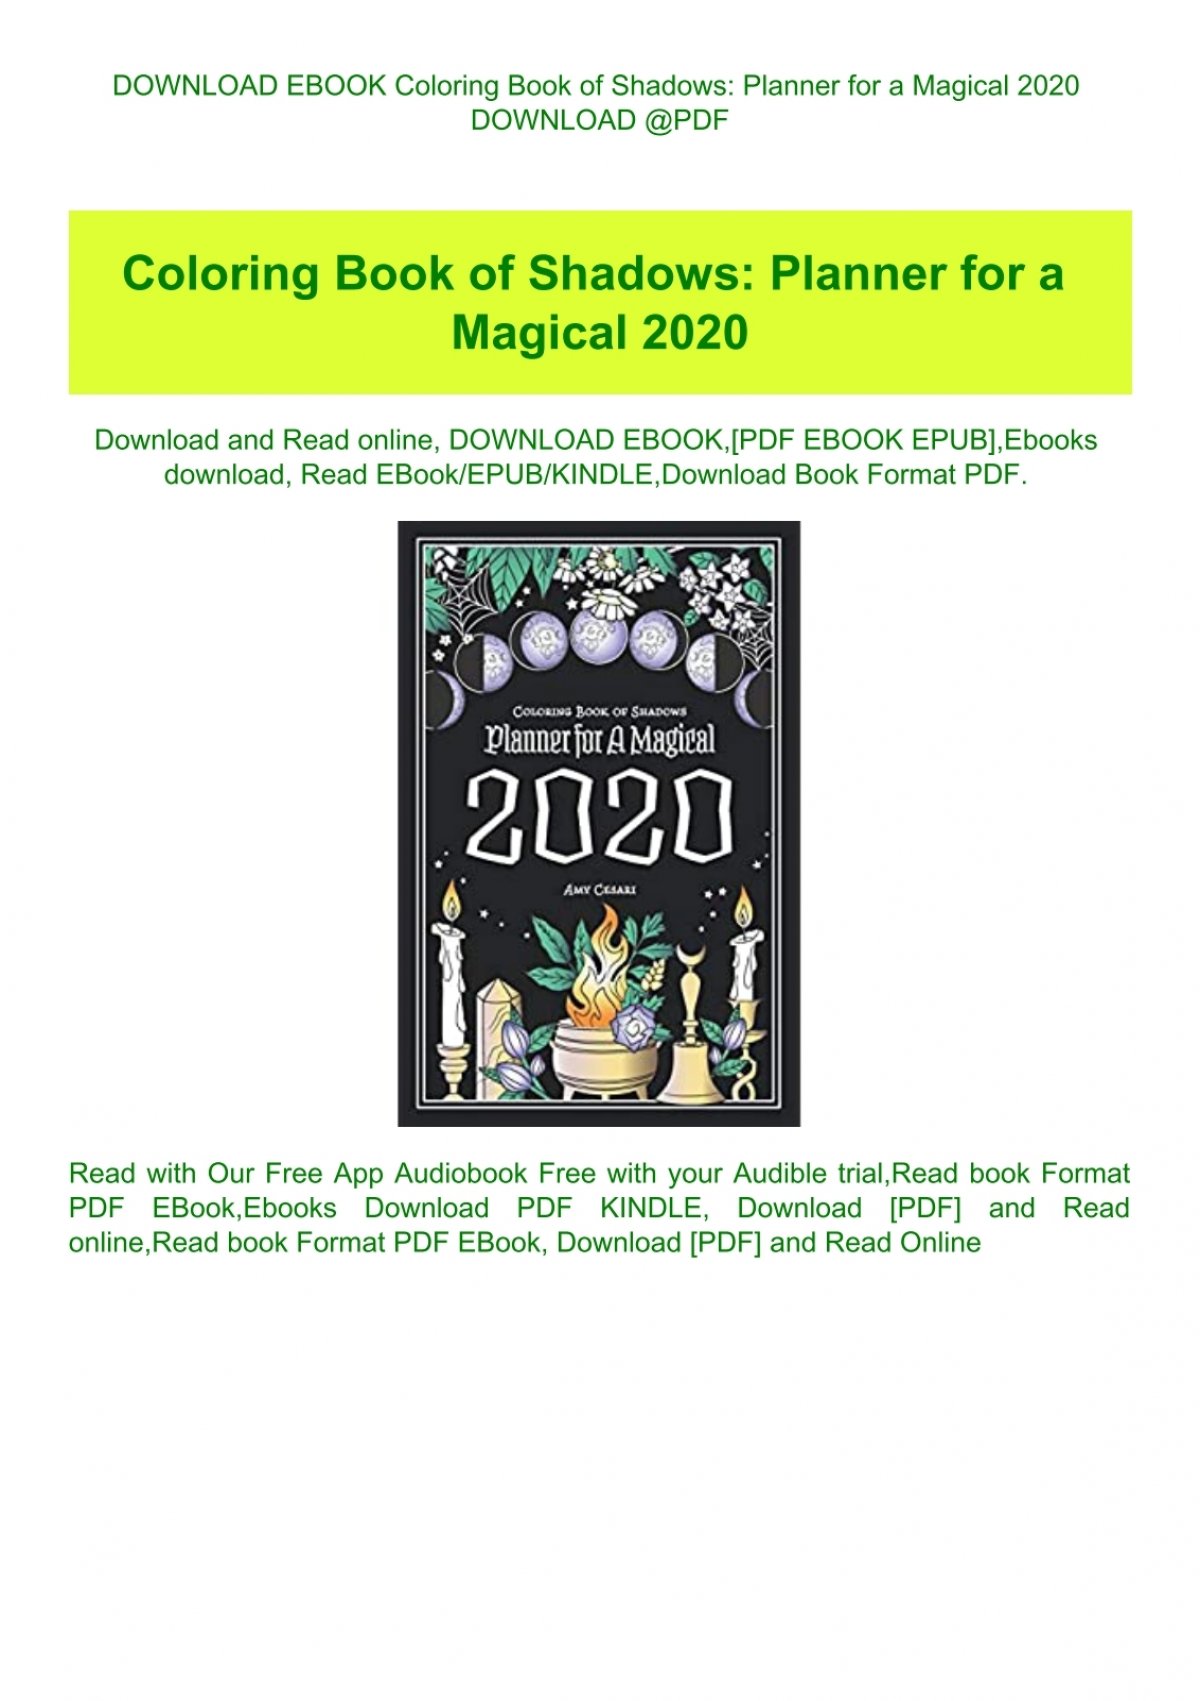 Download Download Ebook Coloring Book Of Shadows Planner For A Magical 2020 Download Pdf